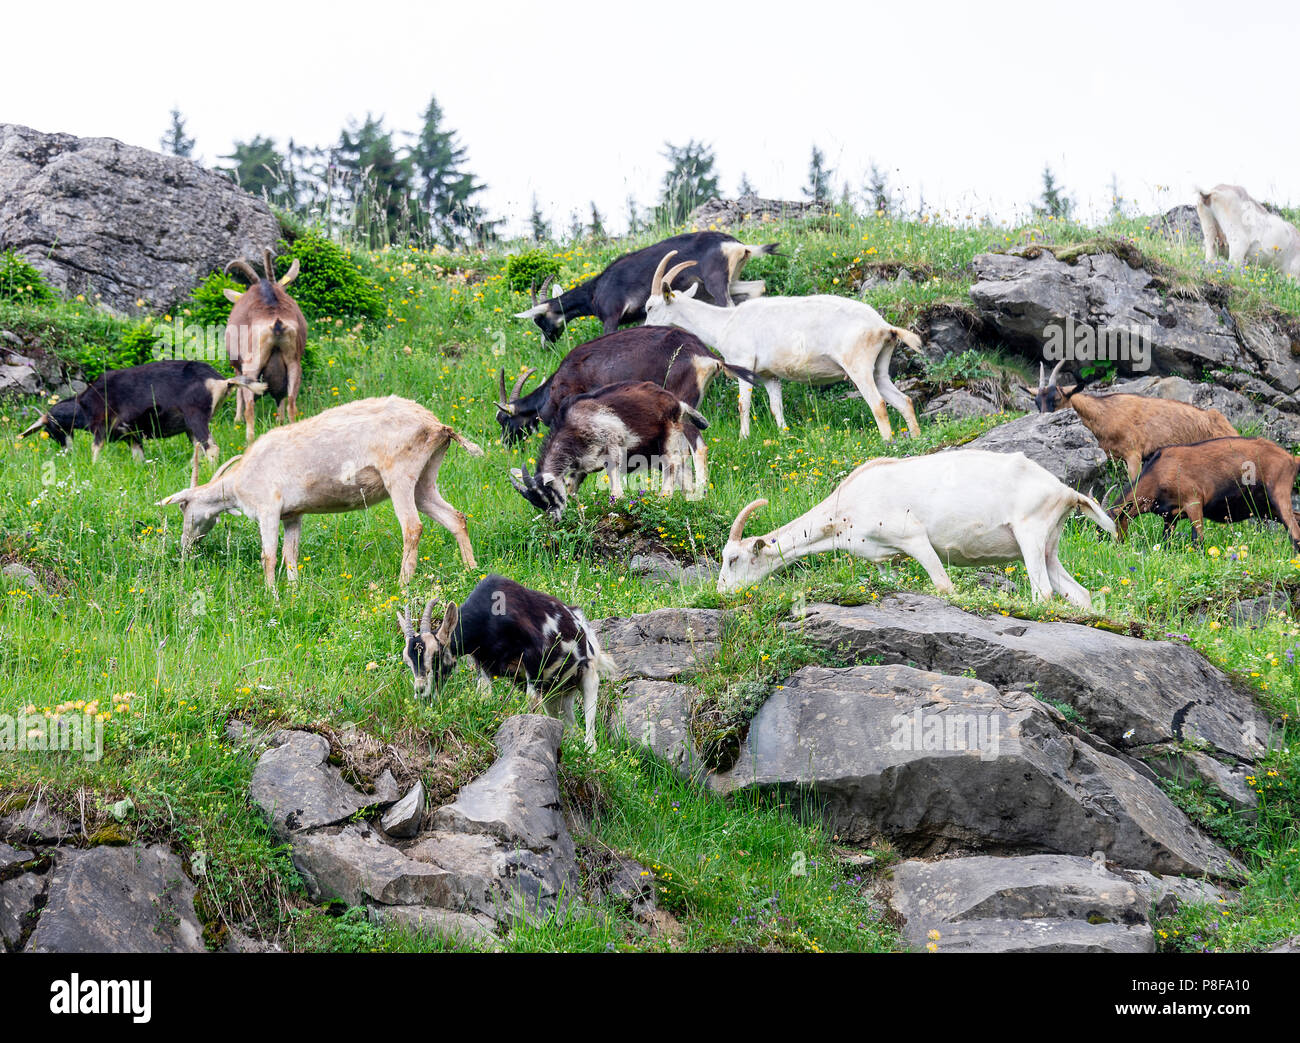 Wild Goats Roaming Free on a Hillside near Les Lindarets in the French Alps near Montriond Haute-Savoie Portes du Soleil France Stock Photo